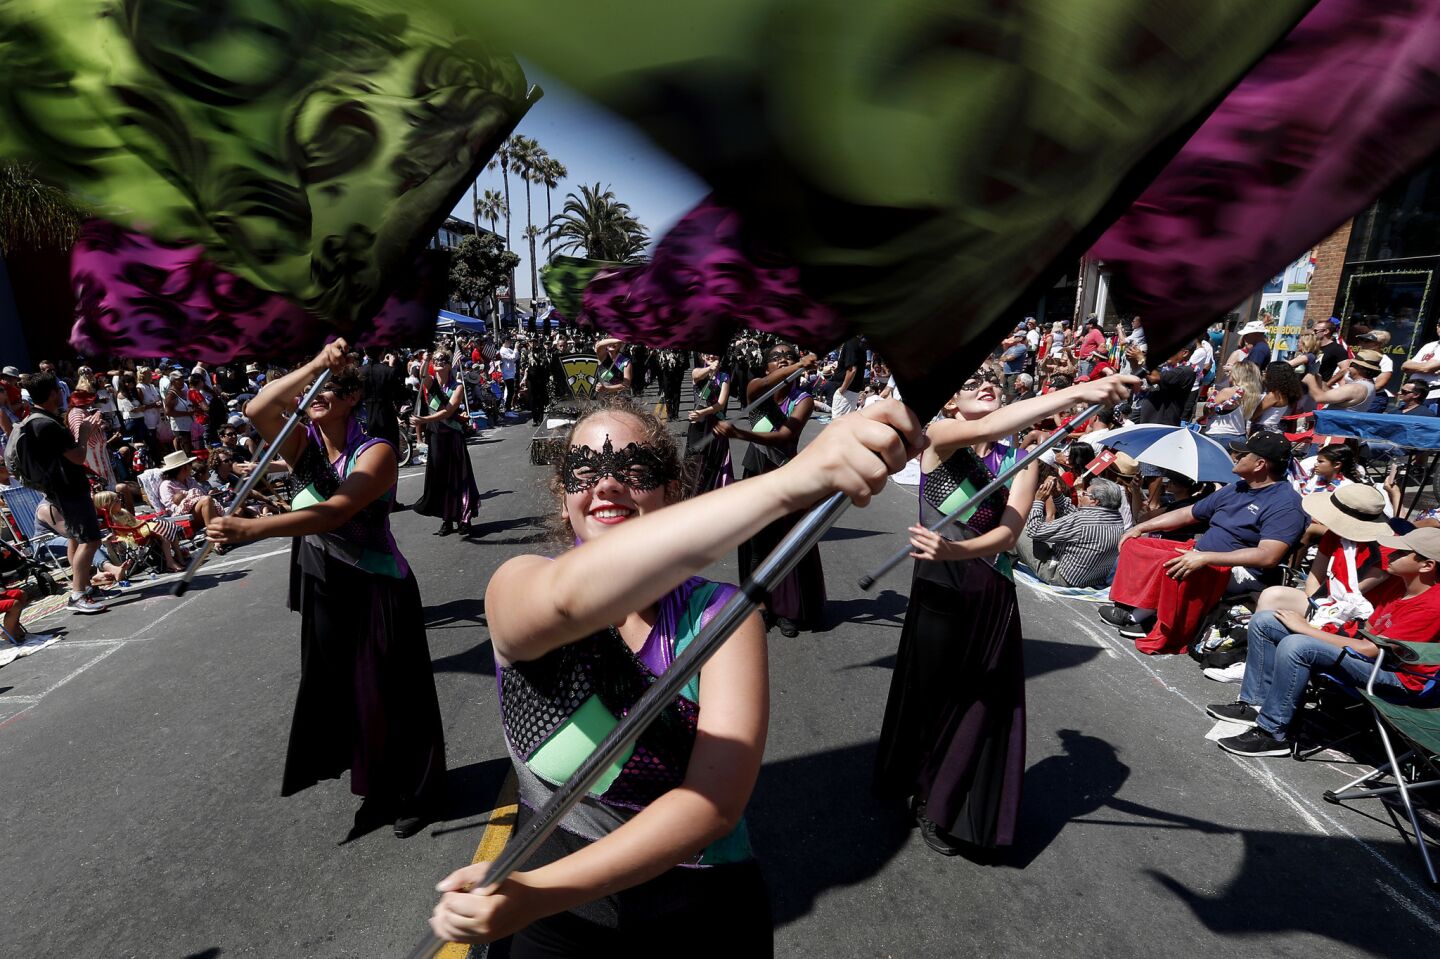 A flag team from Waconia (Wis.) High School performs on Main Street during the annual Independence Day Parade in Huntington Beach.